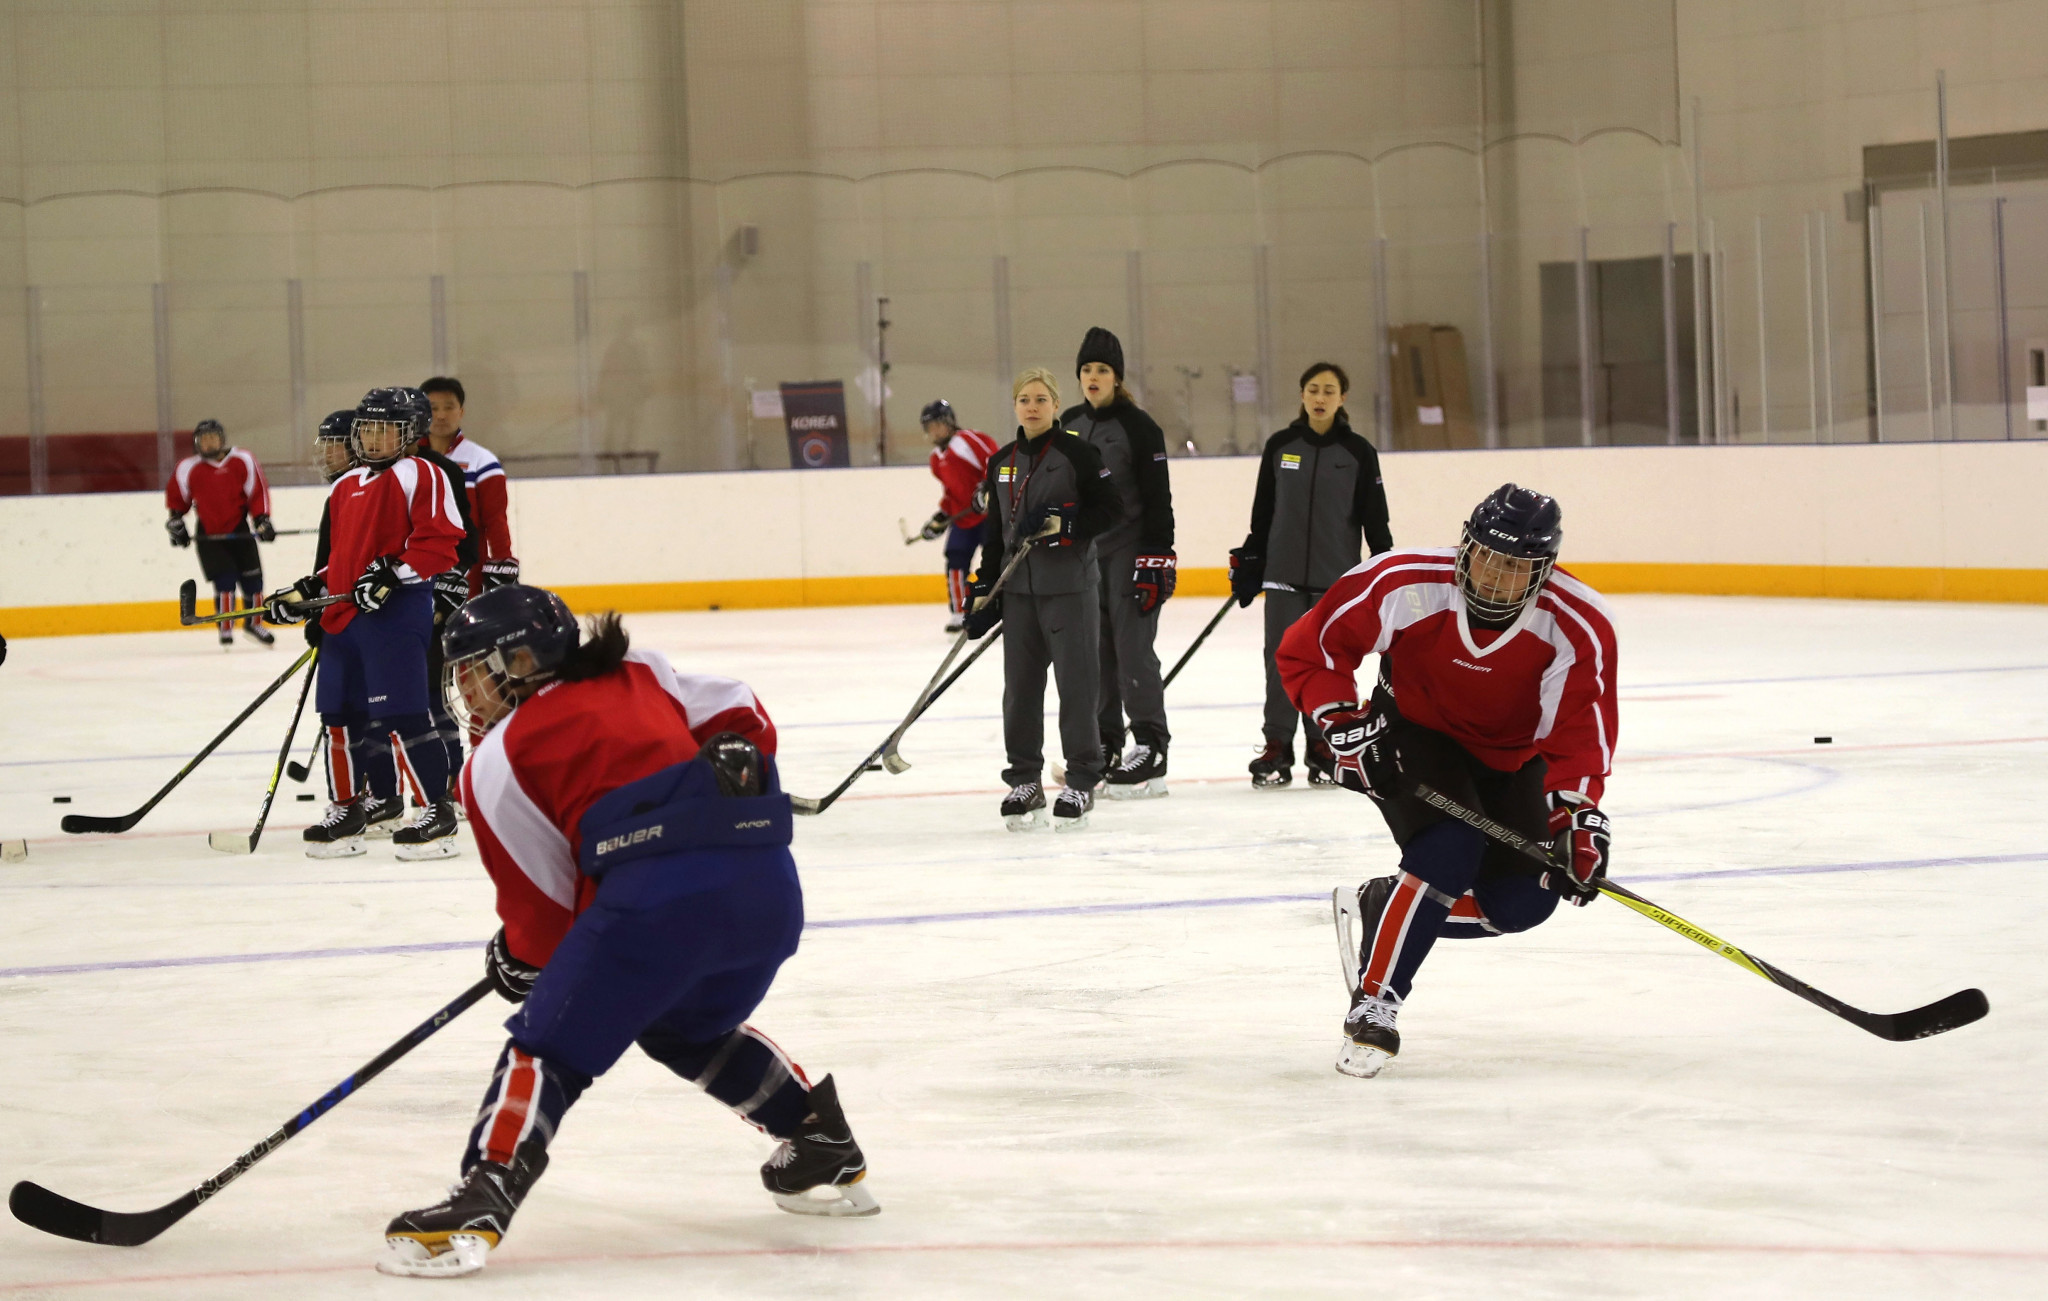 The unified Korean women's ice hockey team trained together for the first time last week ©Getty Images